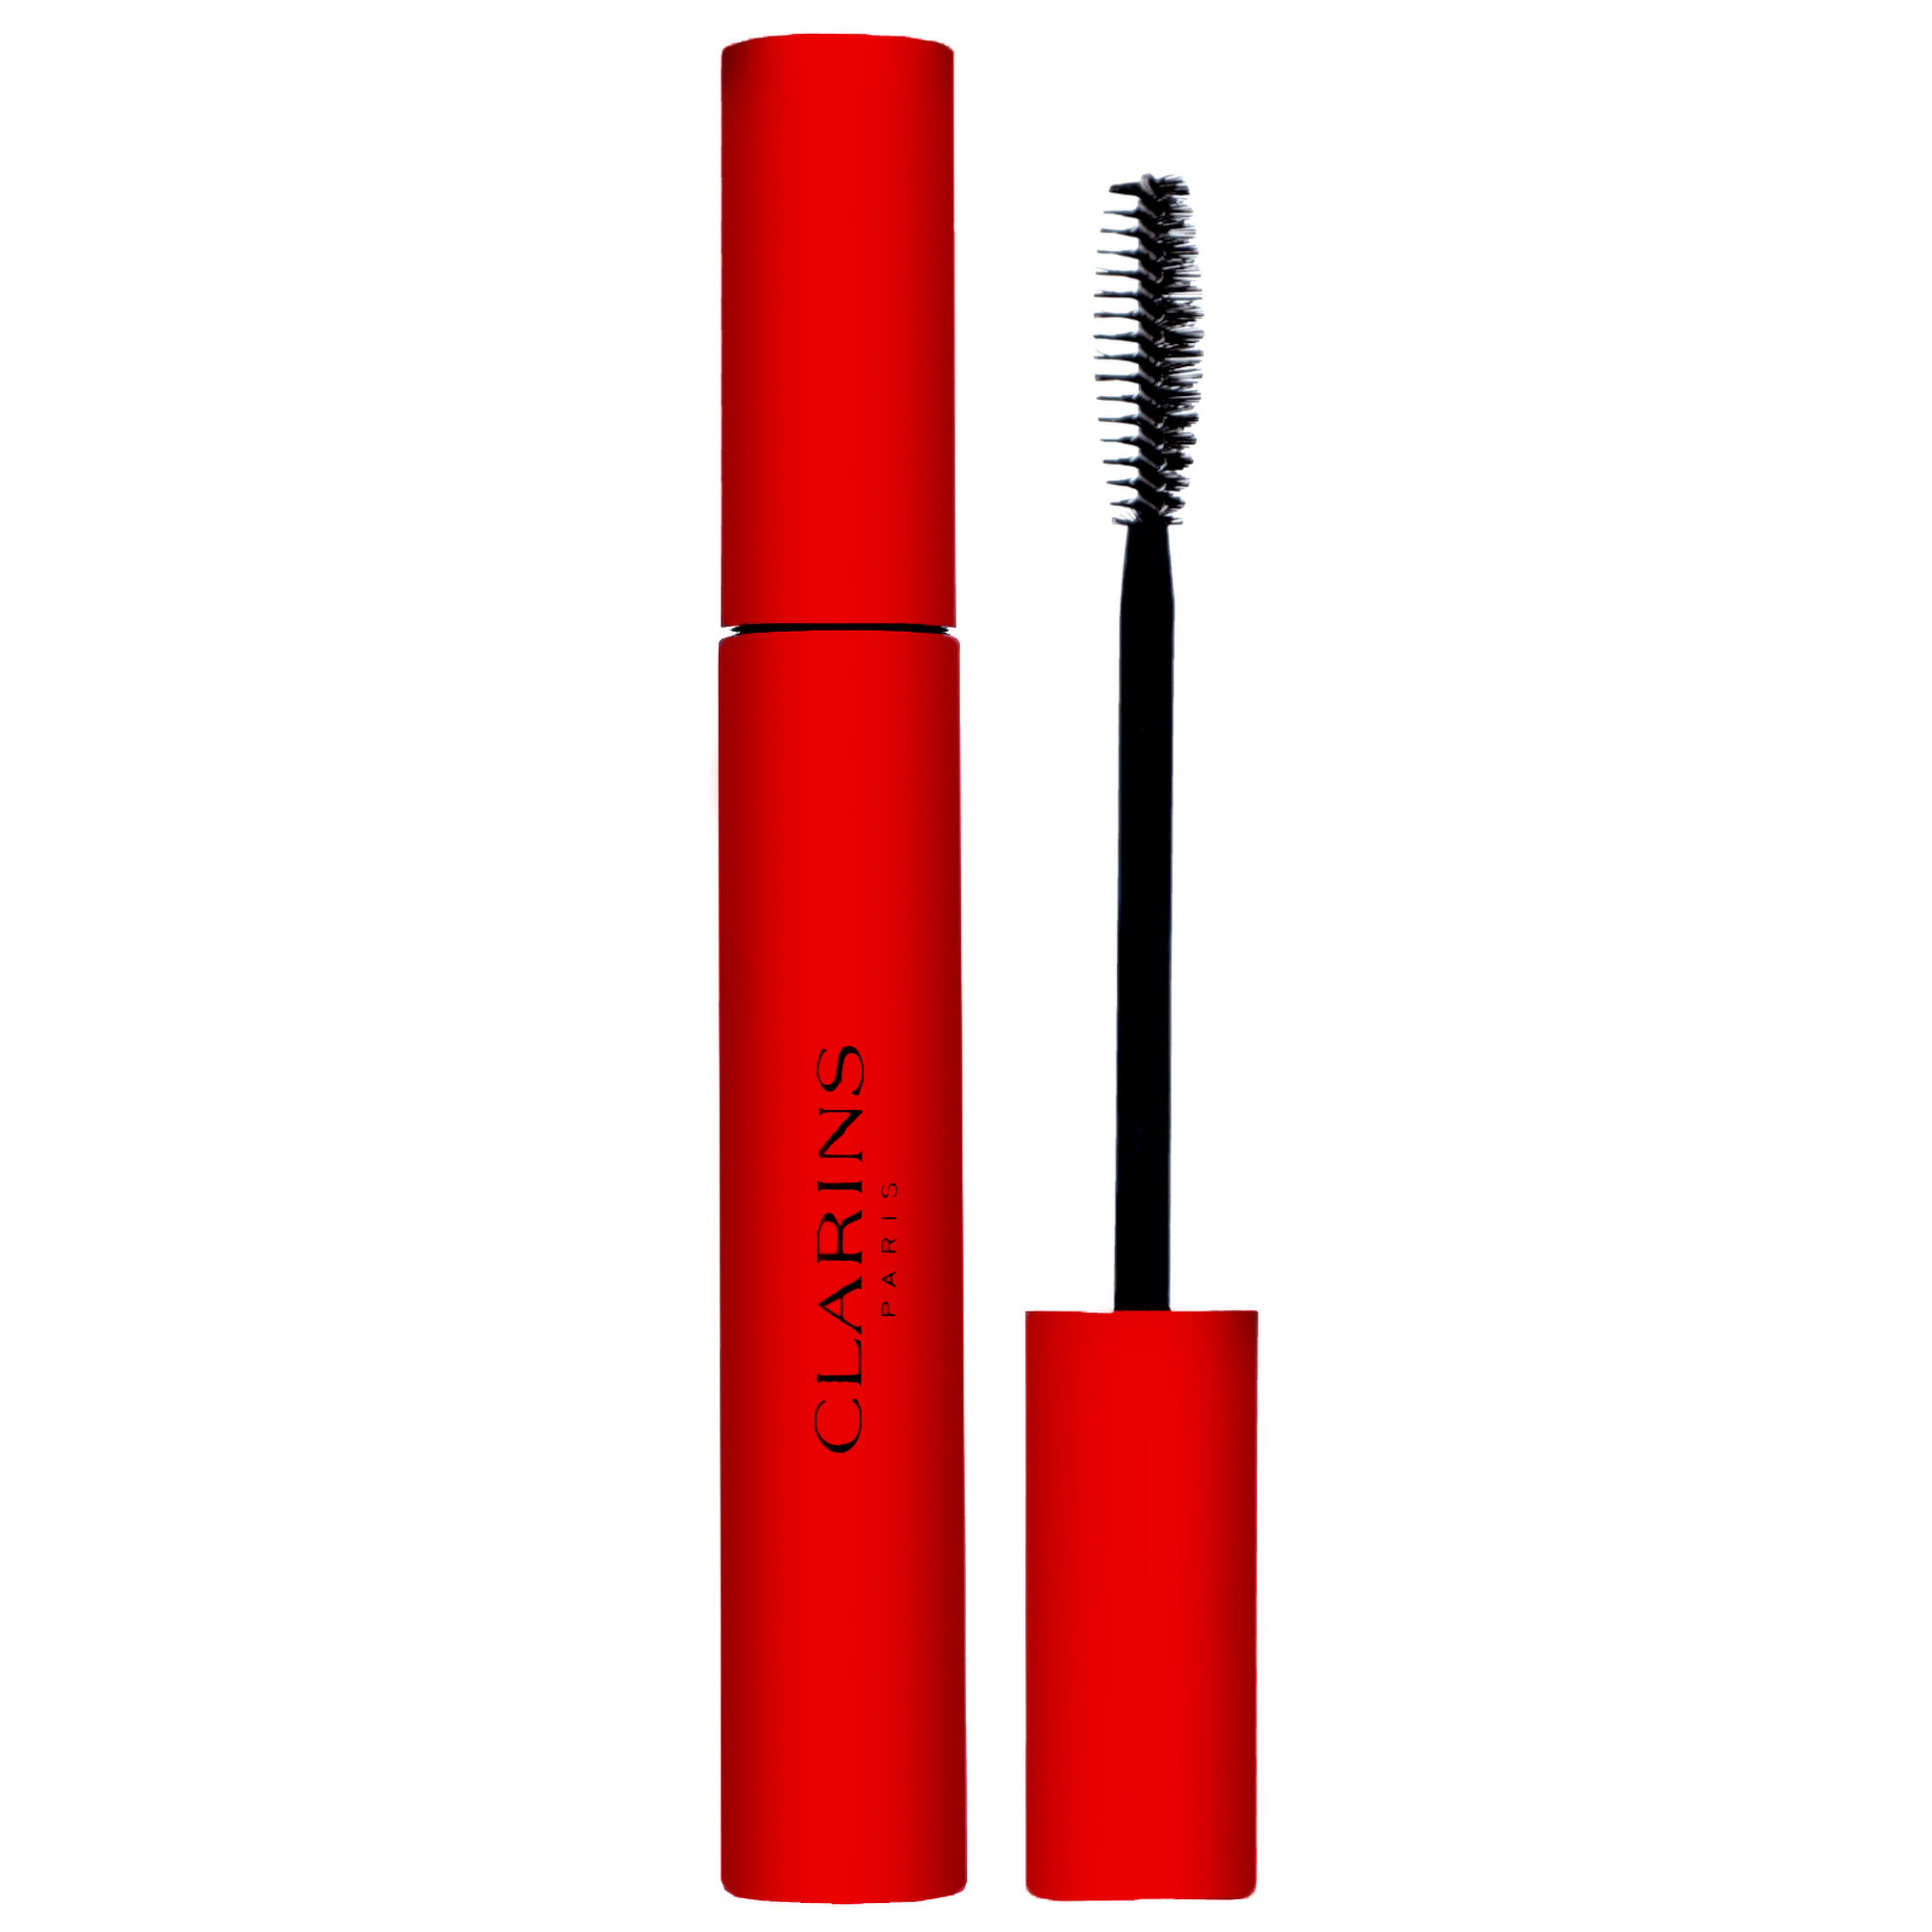 Image of Clarins Double Fix Mascara Waterproof Topcoat for Lashes 8ml / 0.2 fl.oz.